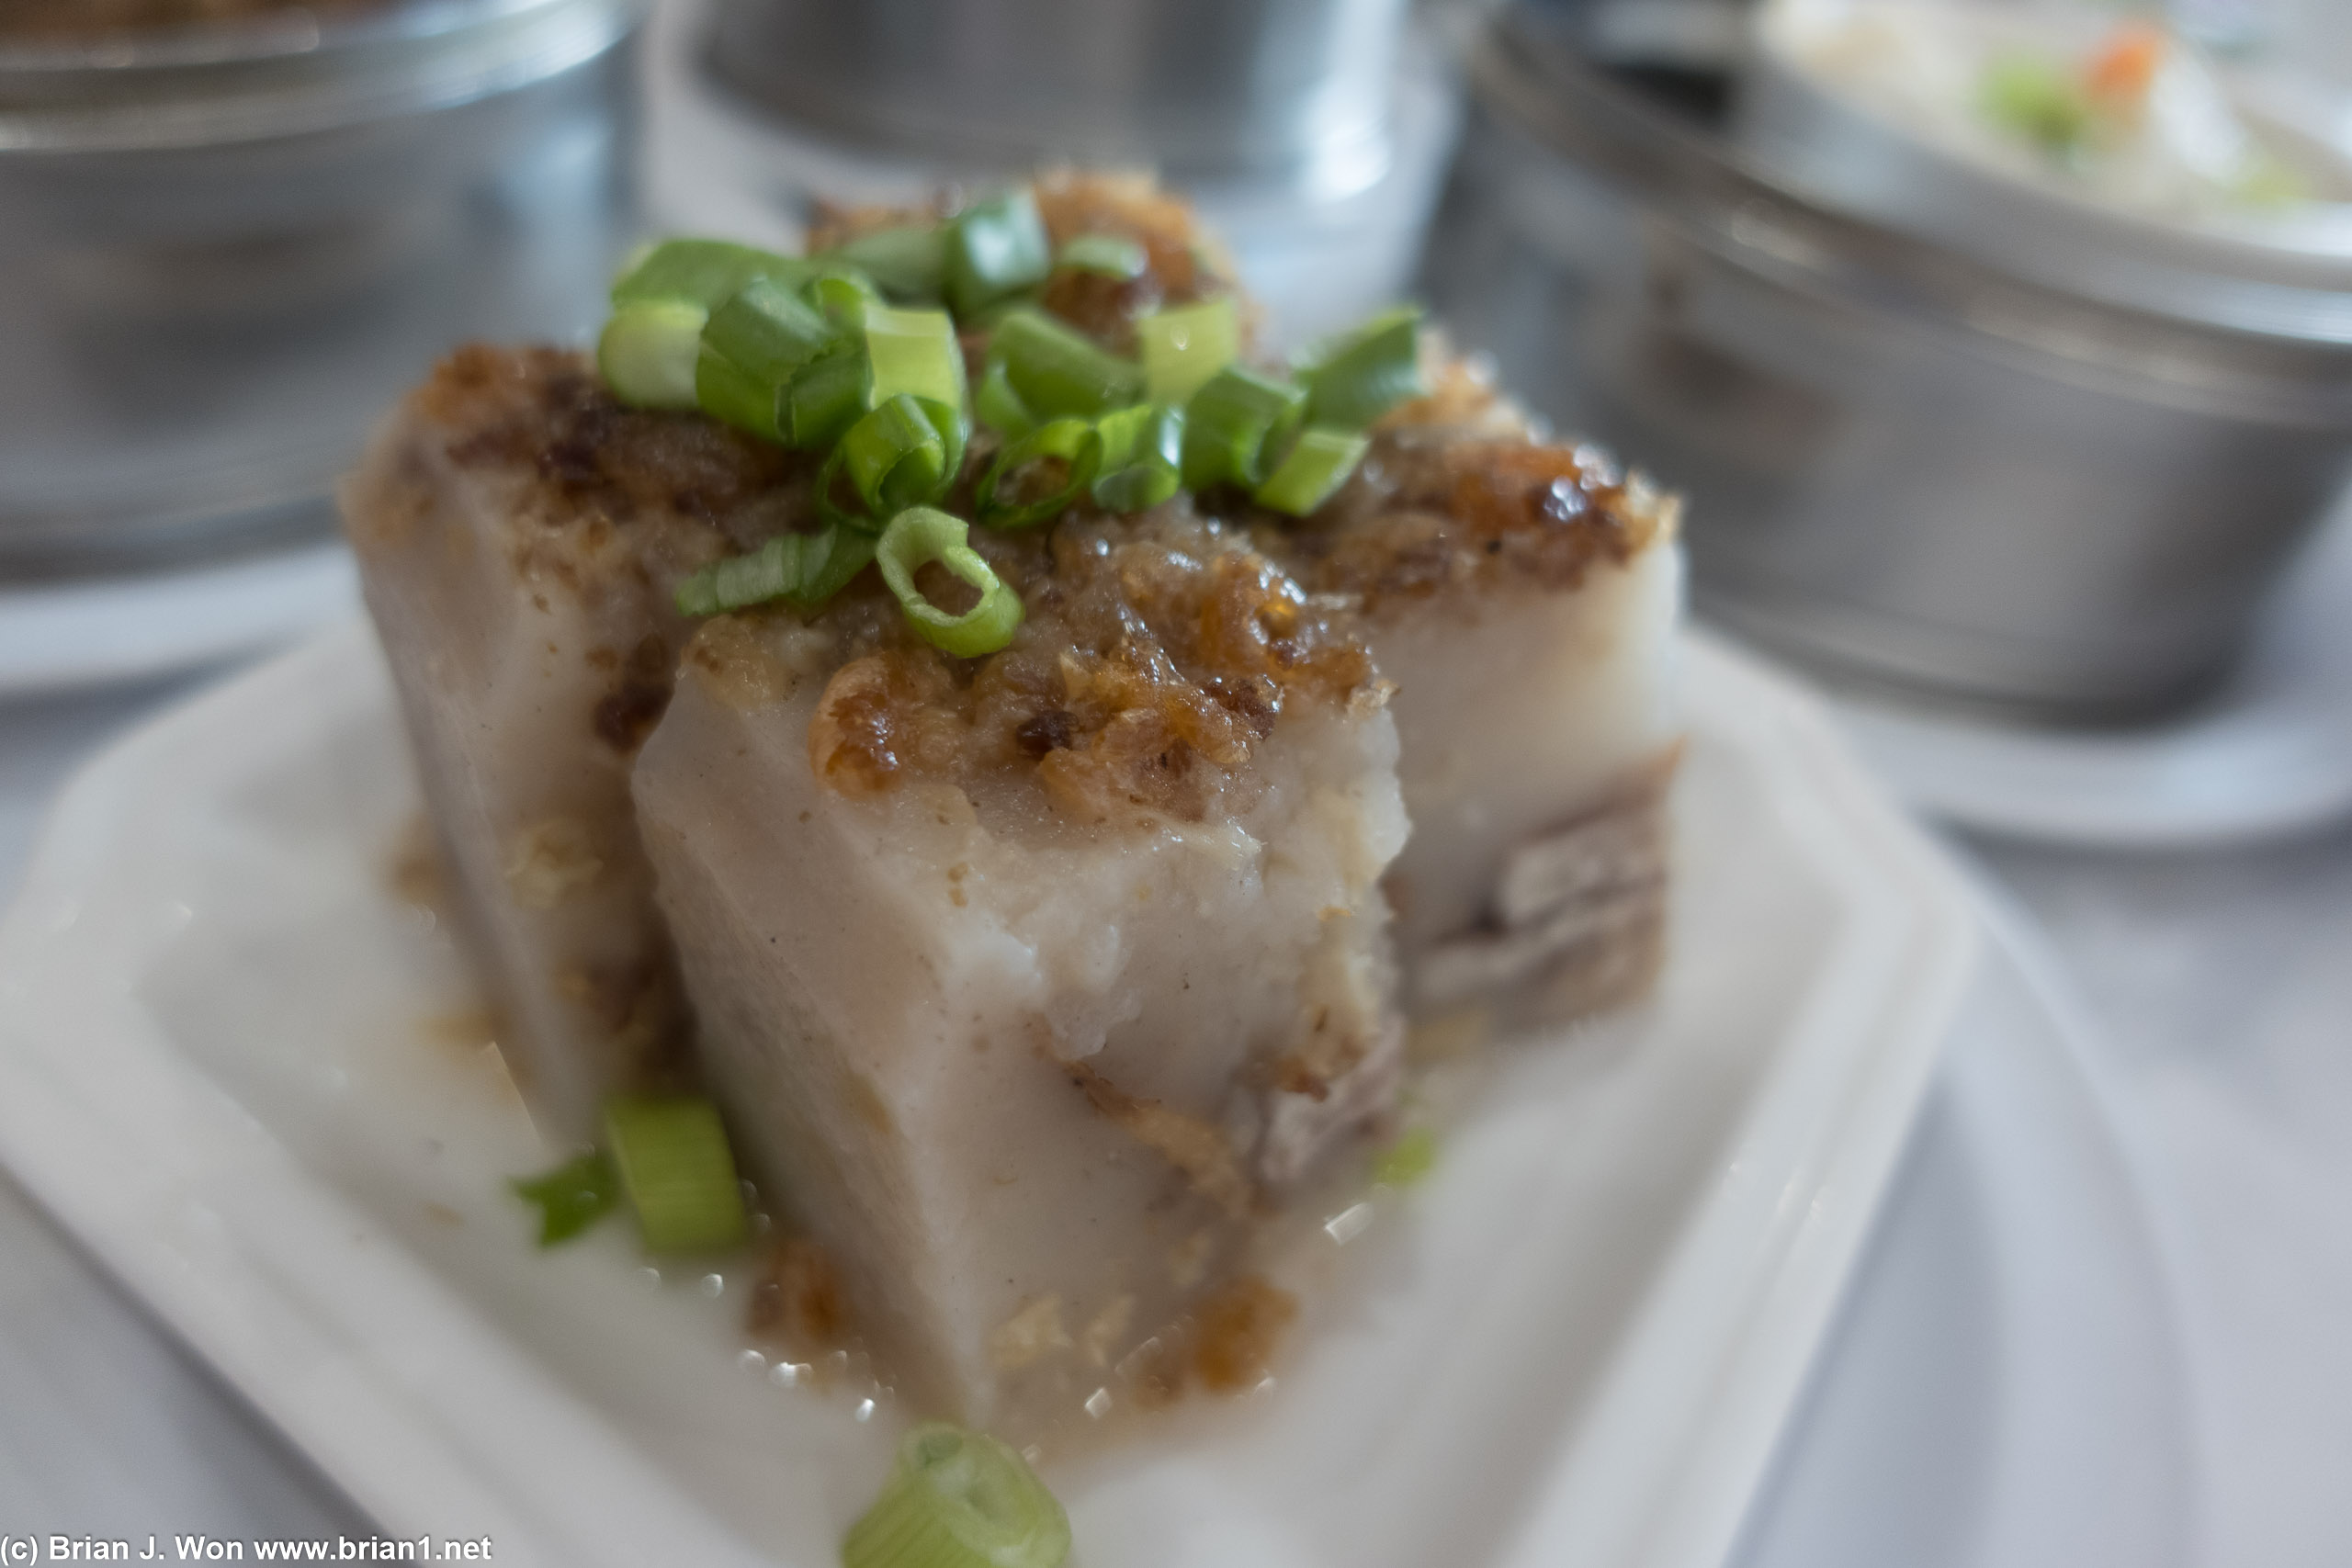 Lo bac guo (turnip cake) was old school thick and steamed, and kind of plain.